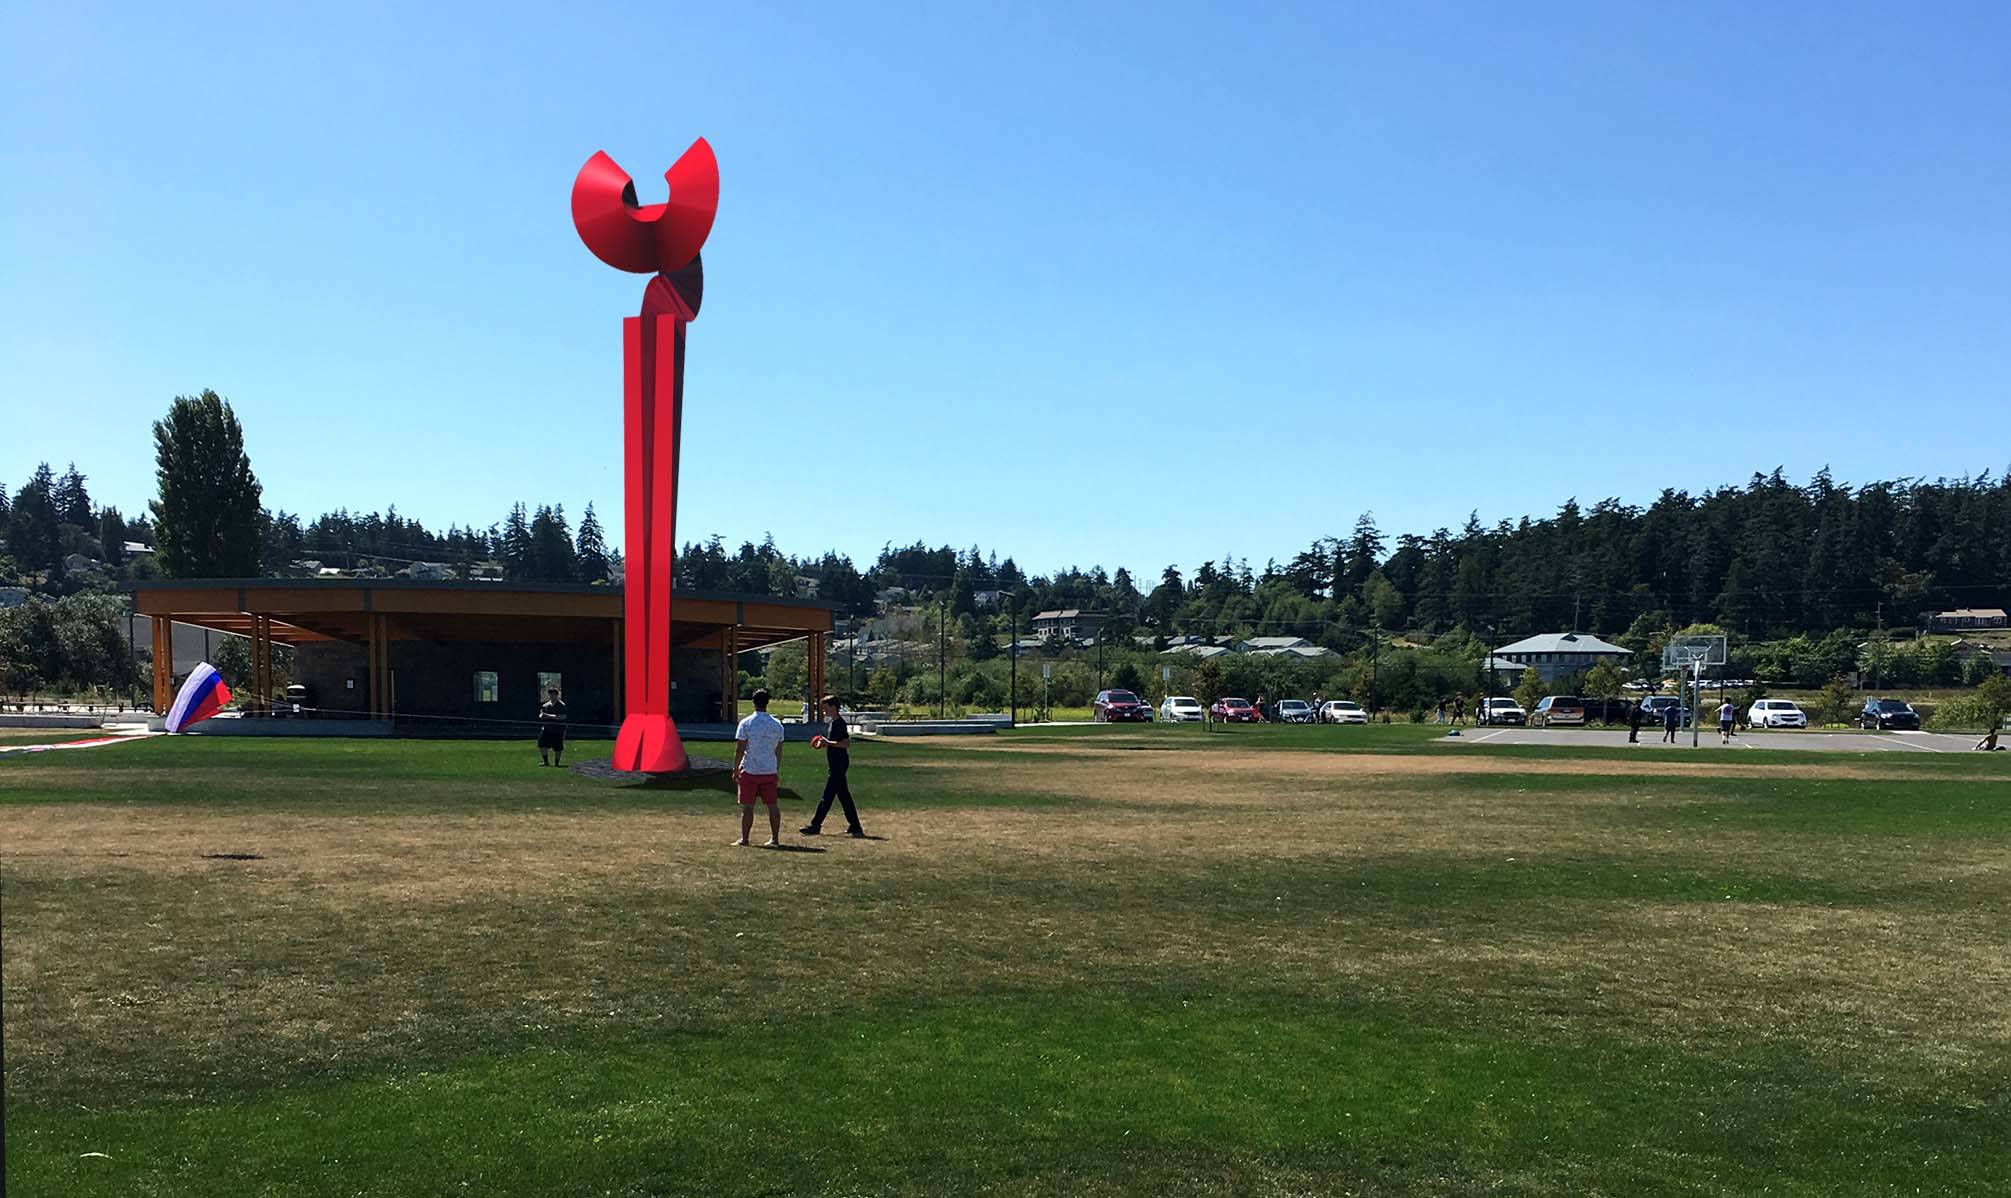 The city of Oak Harbor plans to do a public survey about the “Angel de la Creatividad” sculpture, a 37-foot-tall modern depiction of an angel, and its proposed location at Windjammer Park in early June. Rendering provided.